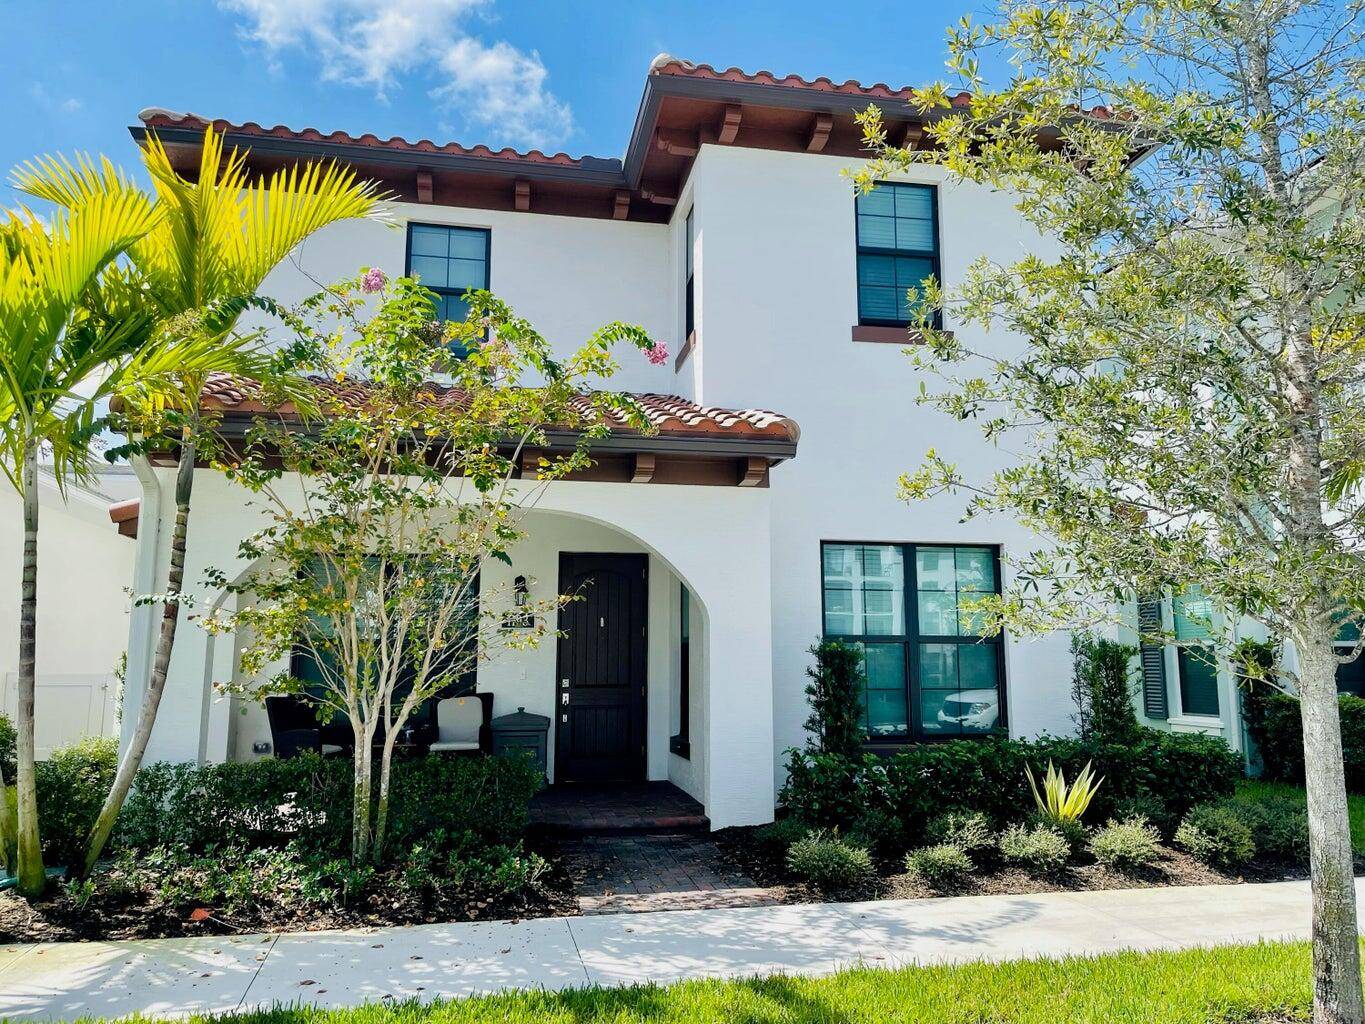 SITUATED IN ONE OF THE MOST DESIRABLE NEW COMMUNITIES IN PALM BEACH GARDENS ALTON !